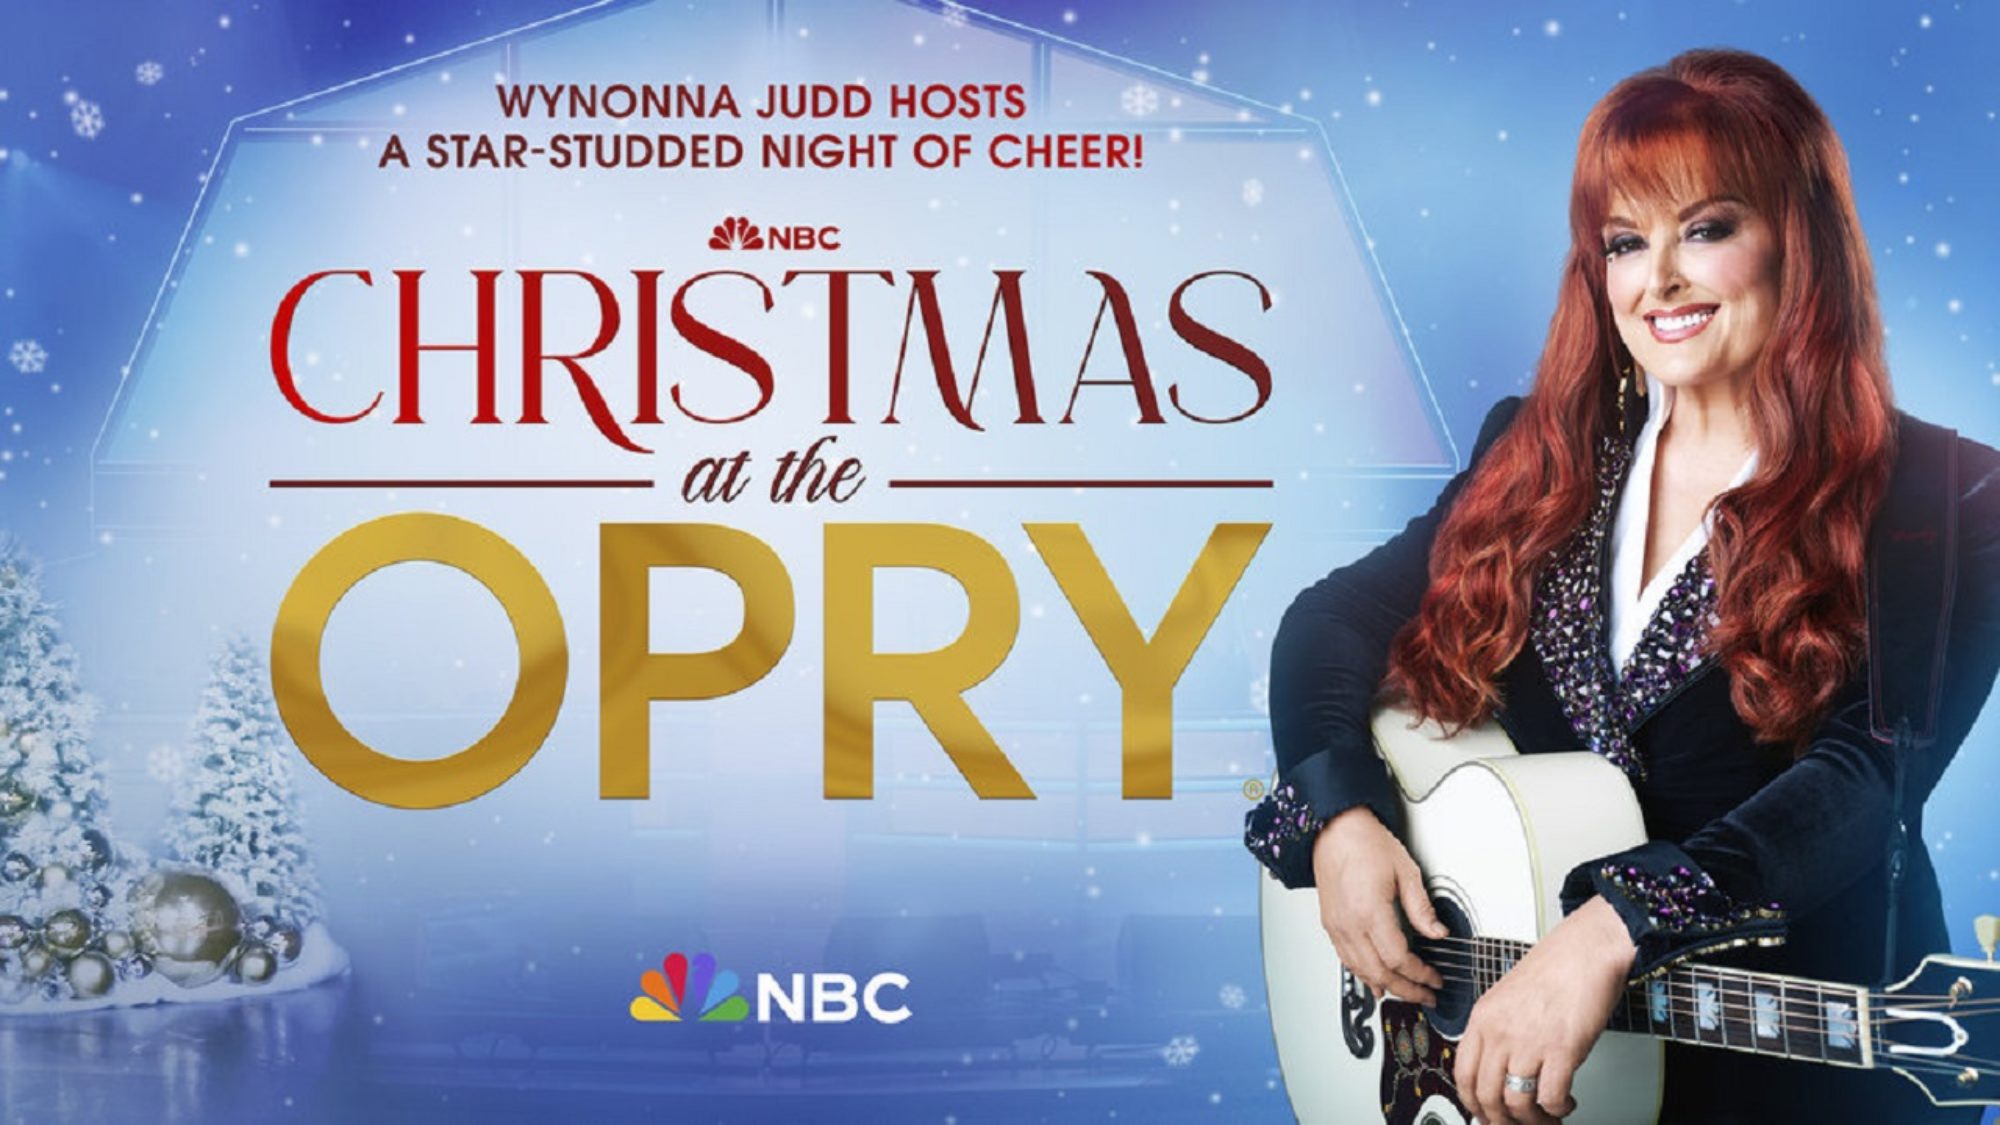 Christmas at the Opry NBC Previews Wynonna JuddHosted Special